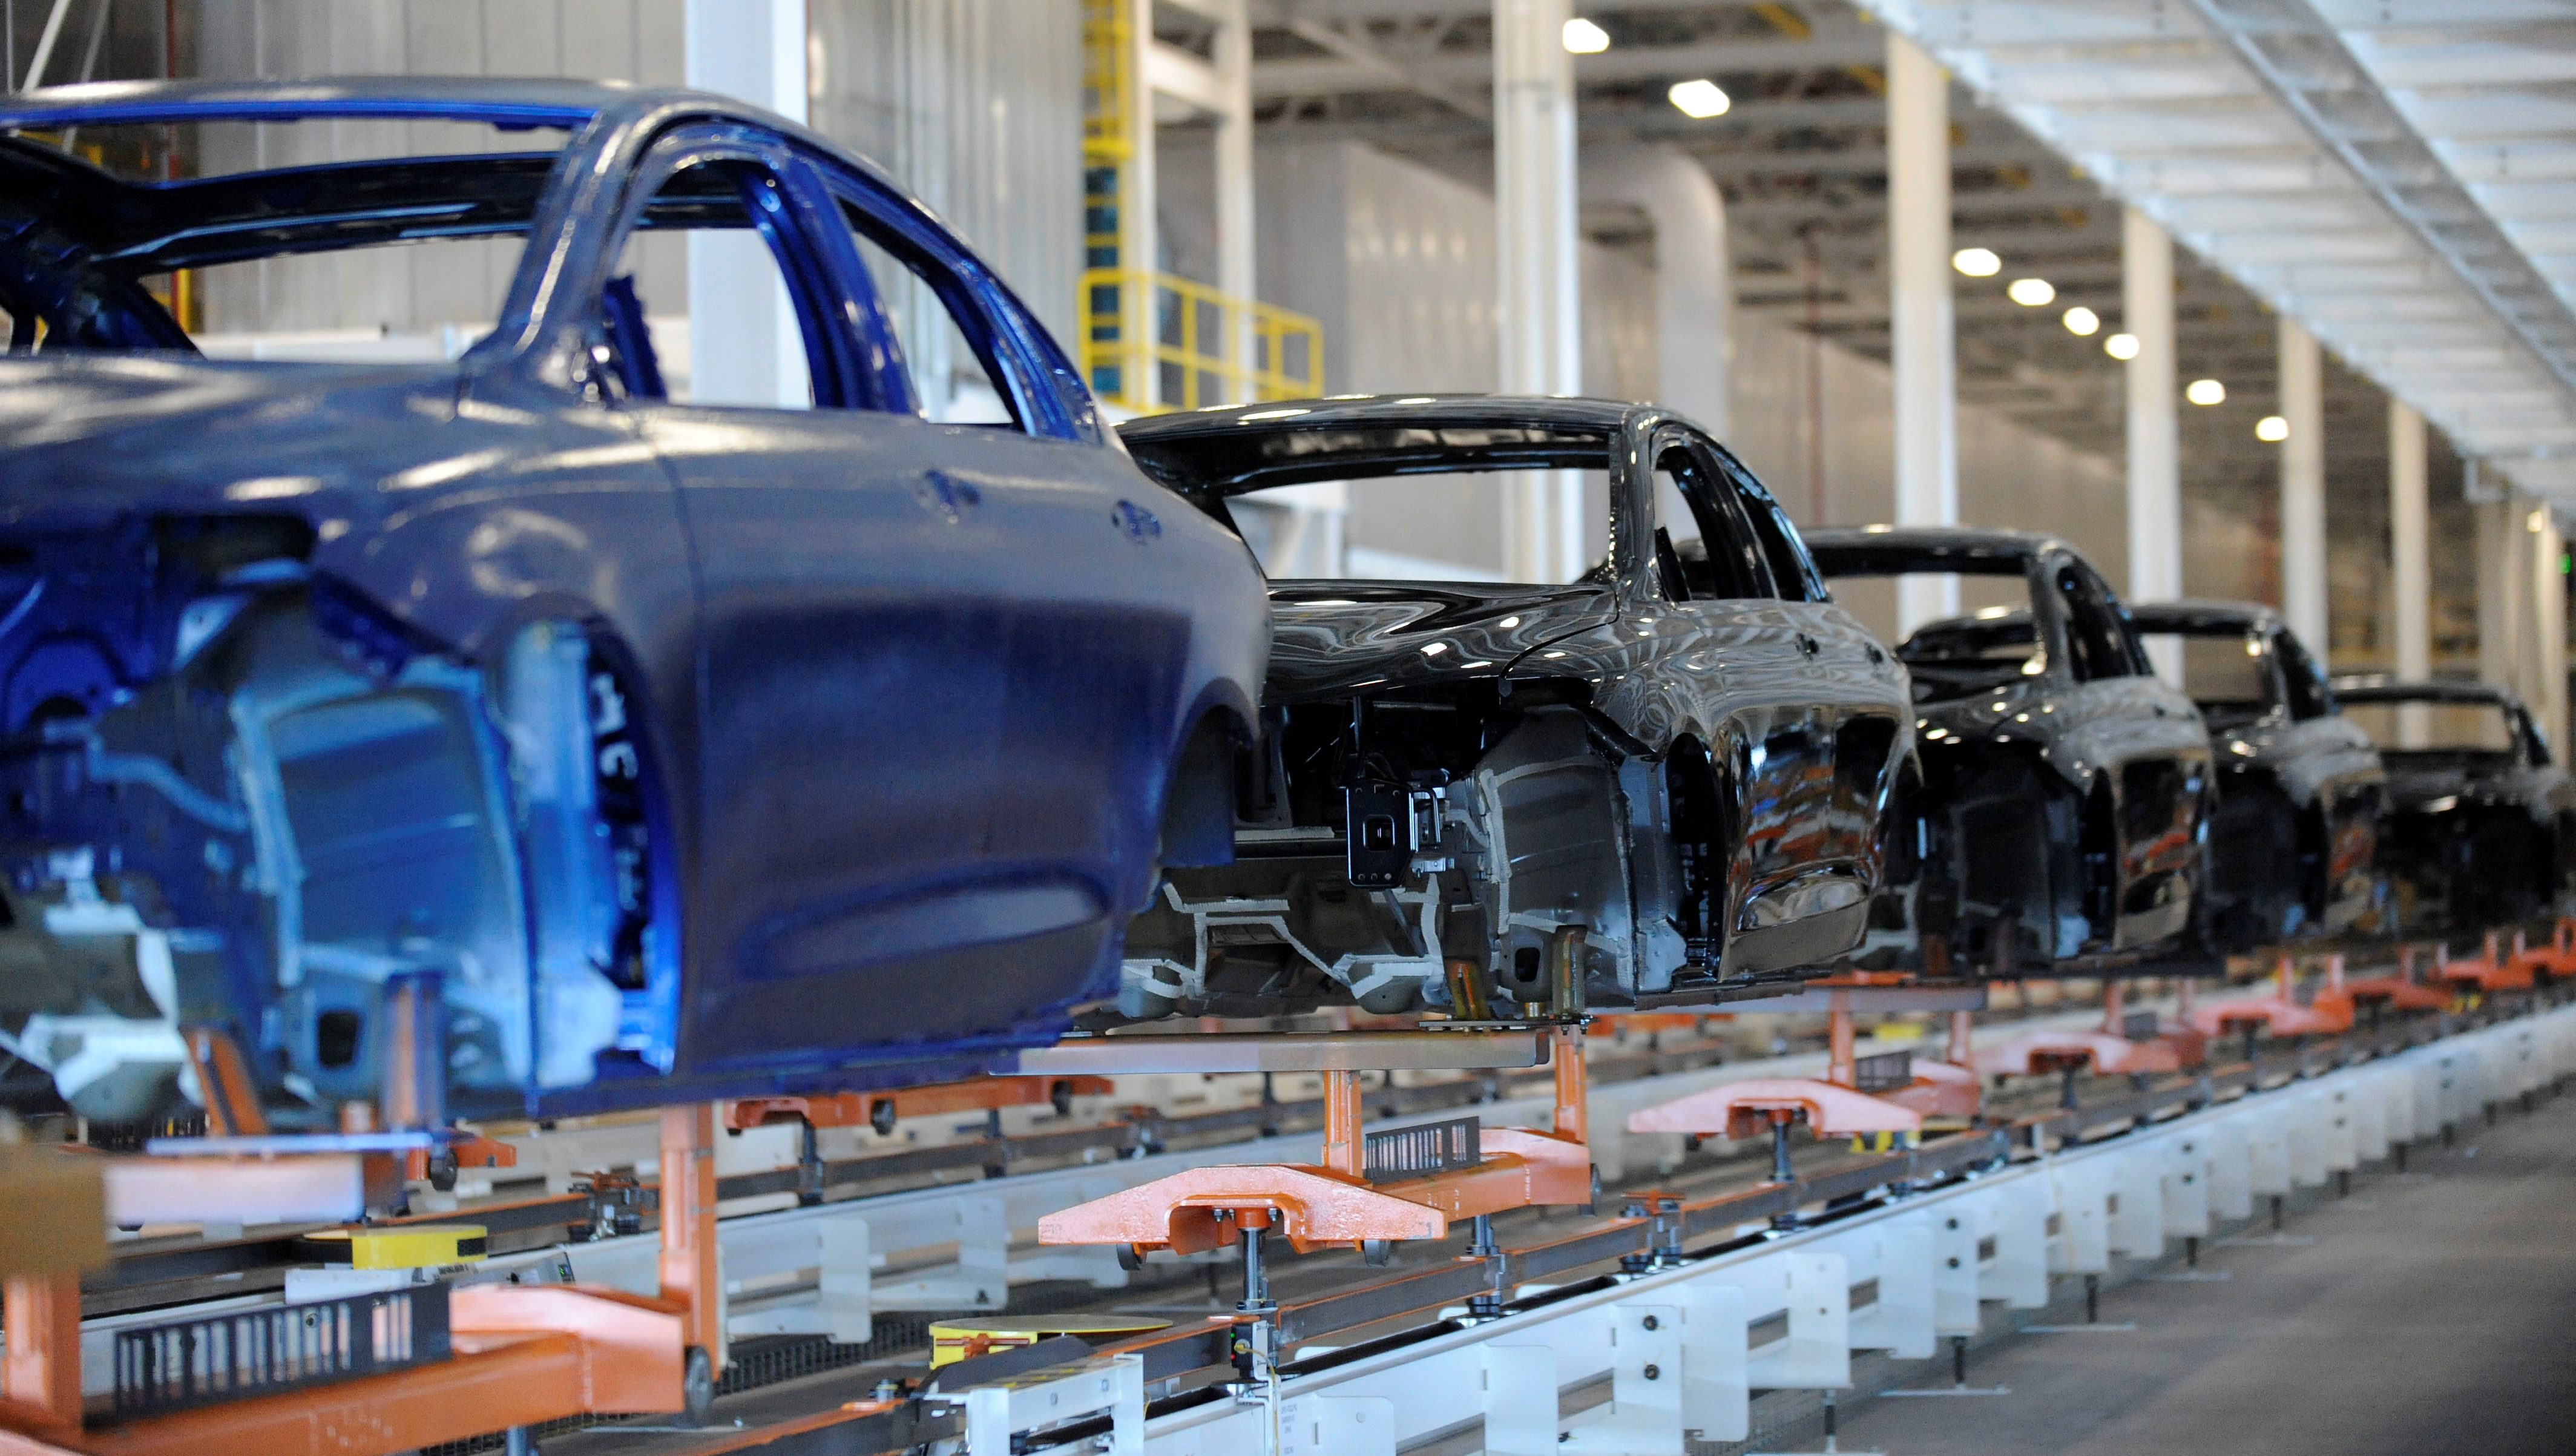 Originally slated for closure in 2010, the Sterling Heights Assembly Plant (SHAP) was completely transformed after receiving an investment of more than $1 billion to build an all-new paint shop and body shop, and to retool the assembly line for the Chrysler 200.